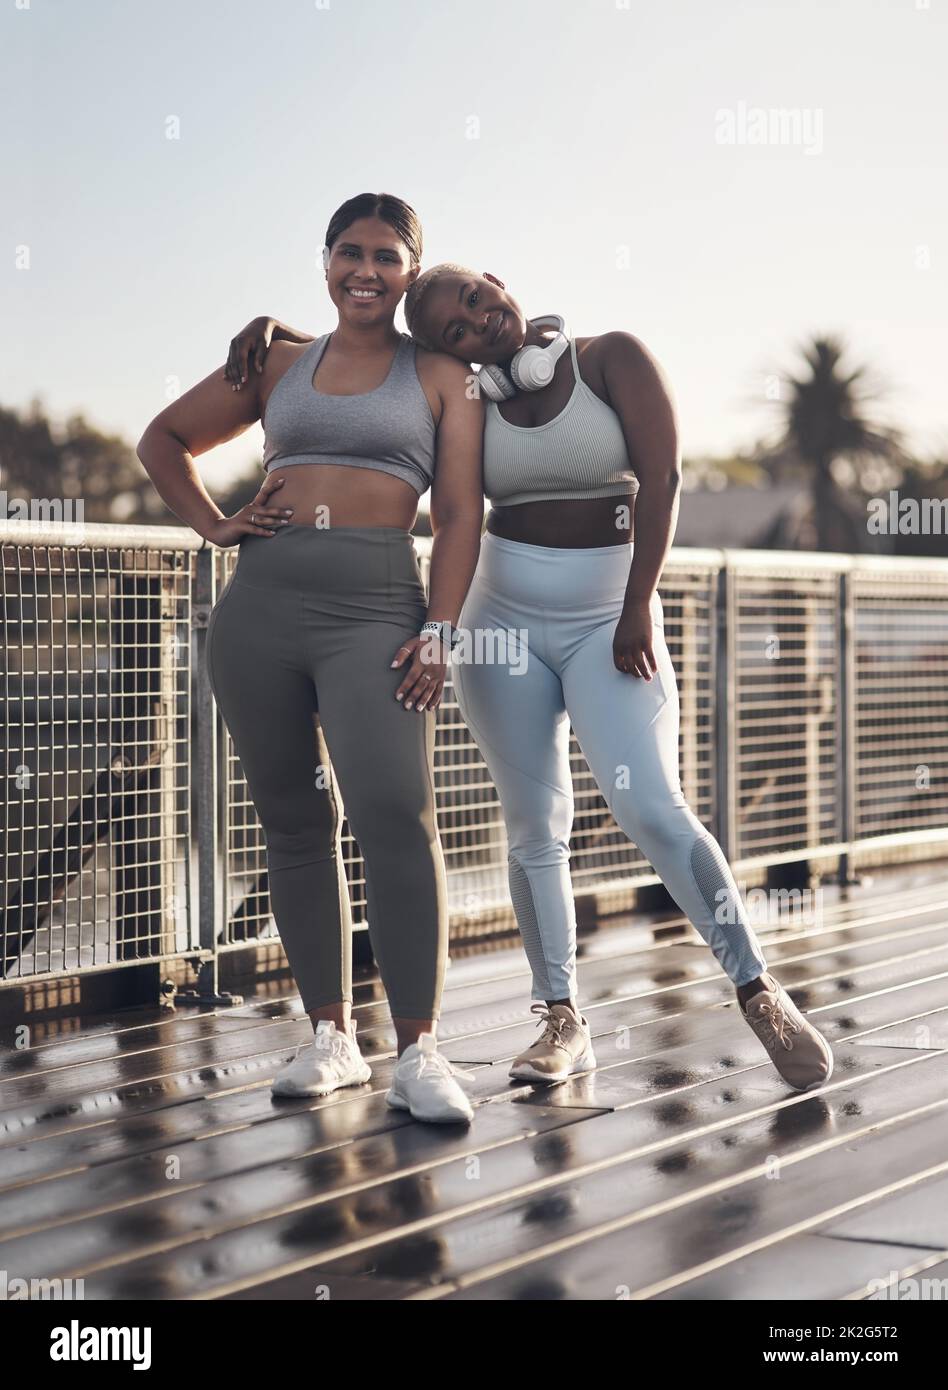 She my best friend and my favourite workout buddy. Shot of two young women out for a run together. Stock Photo